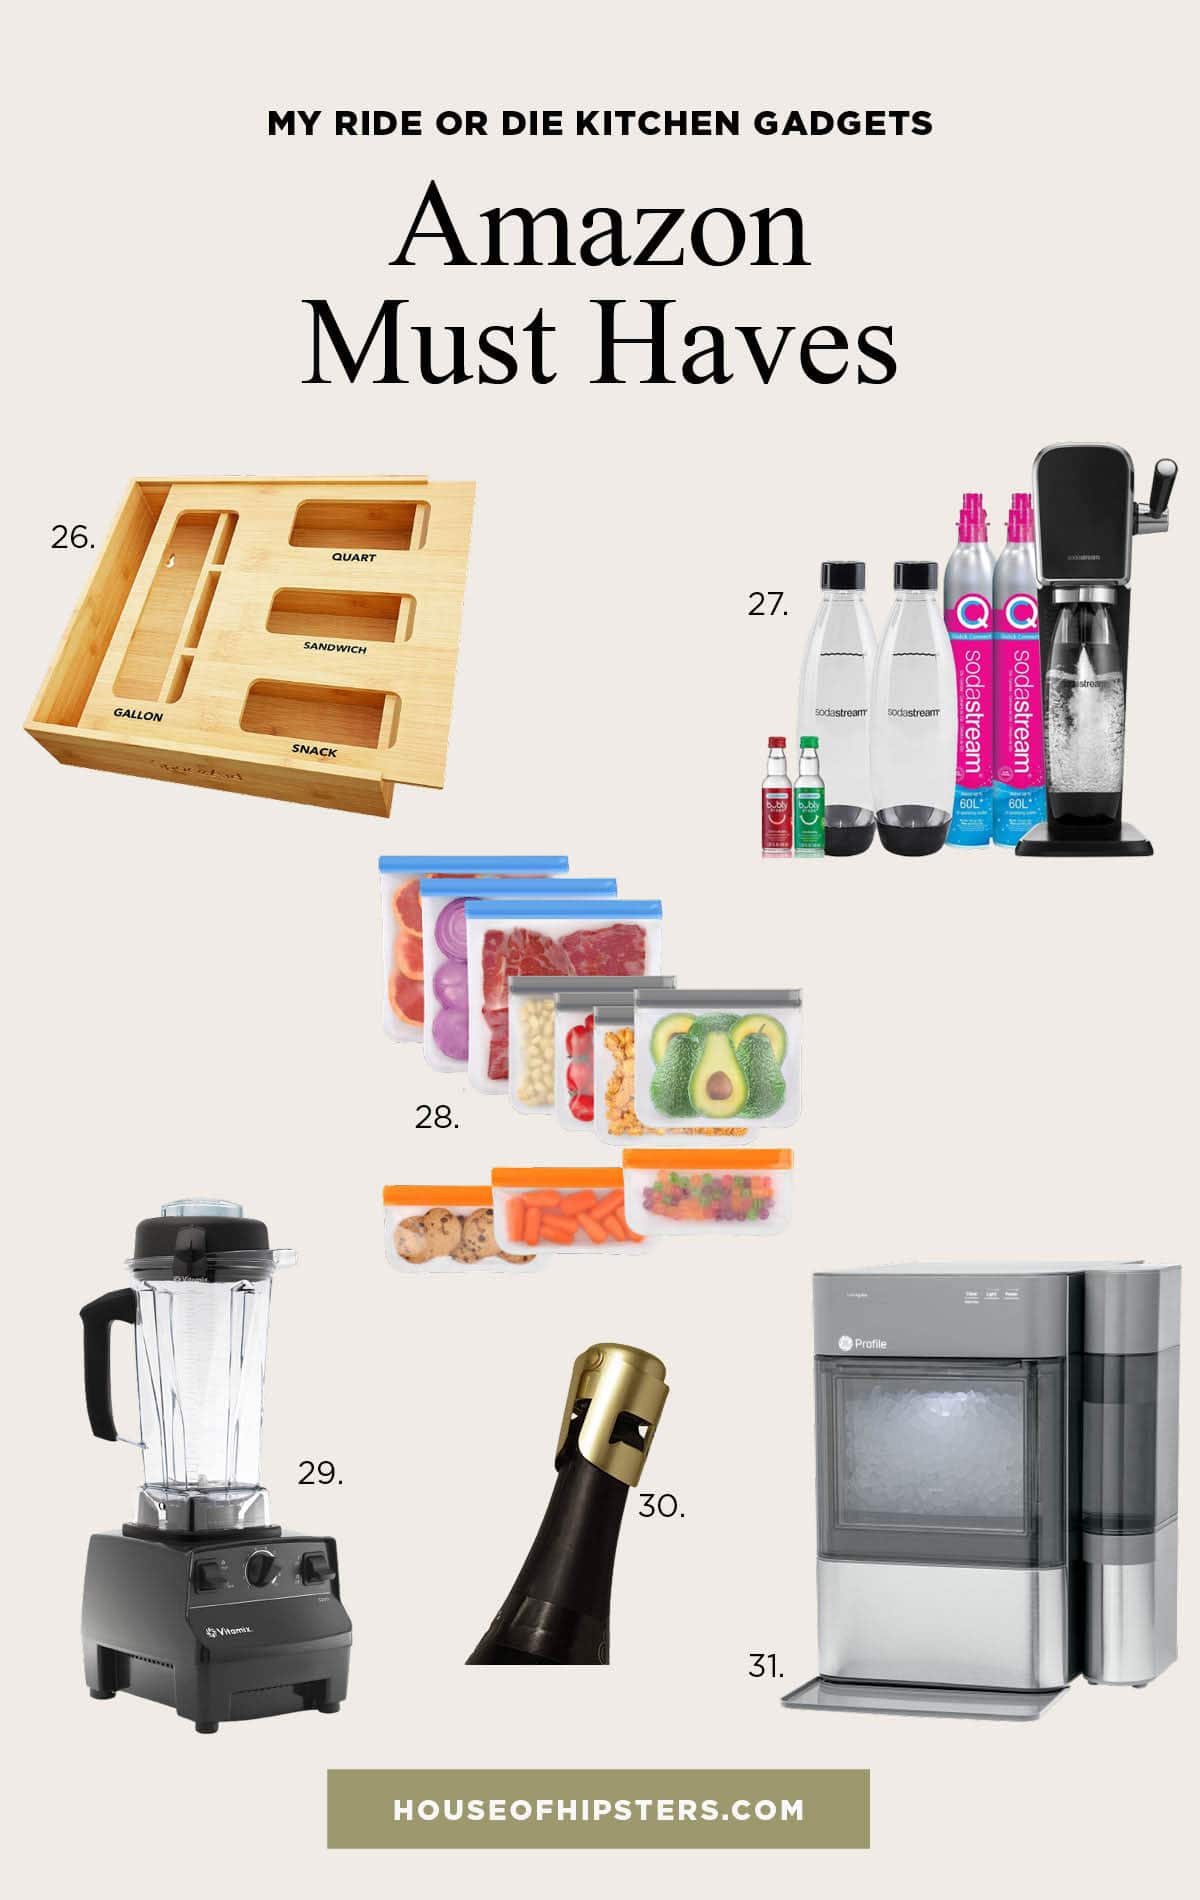 https://houseofhipsters.com/wp-content/uploads/2023/06/amazon-must-haves-kitchen-gadgets-1.jpg